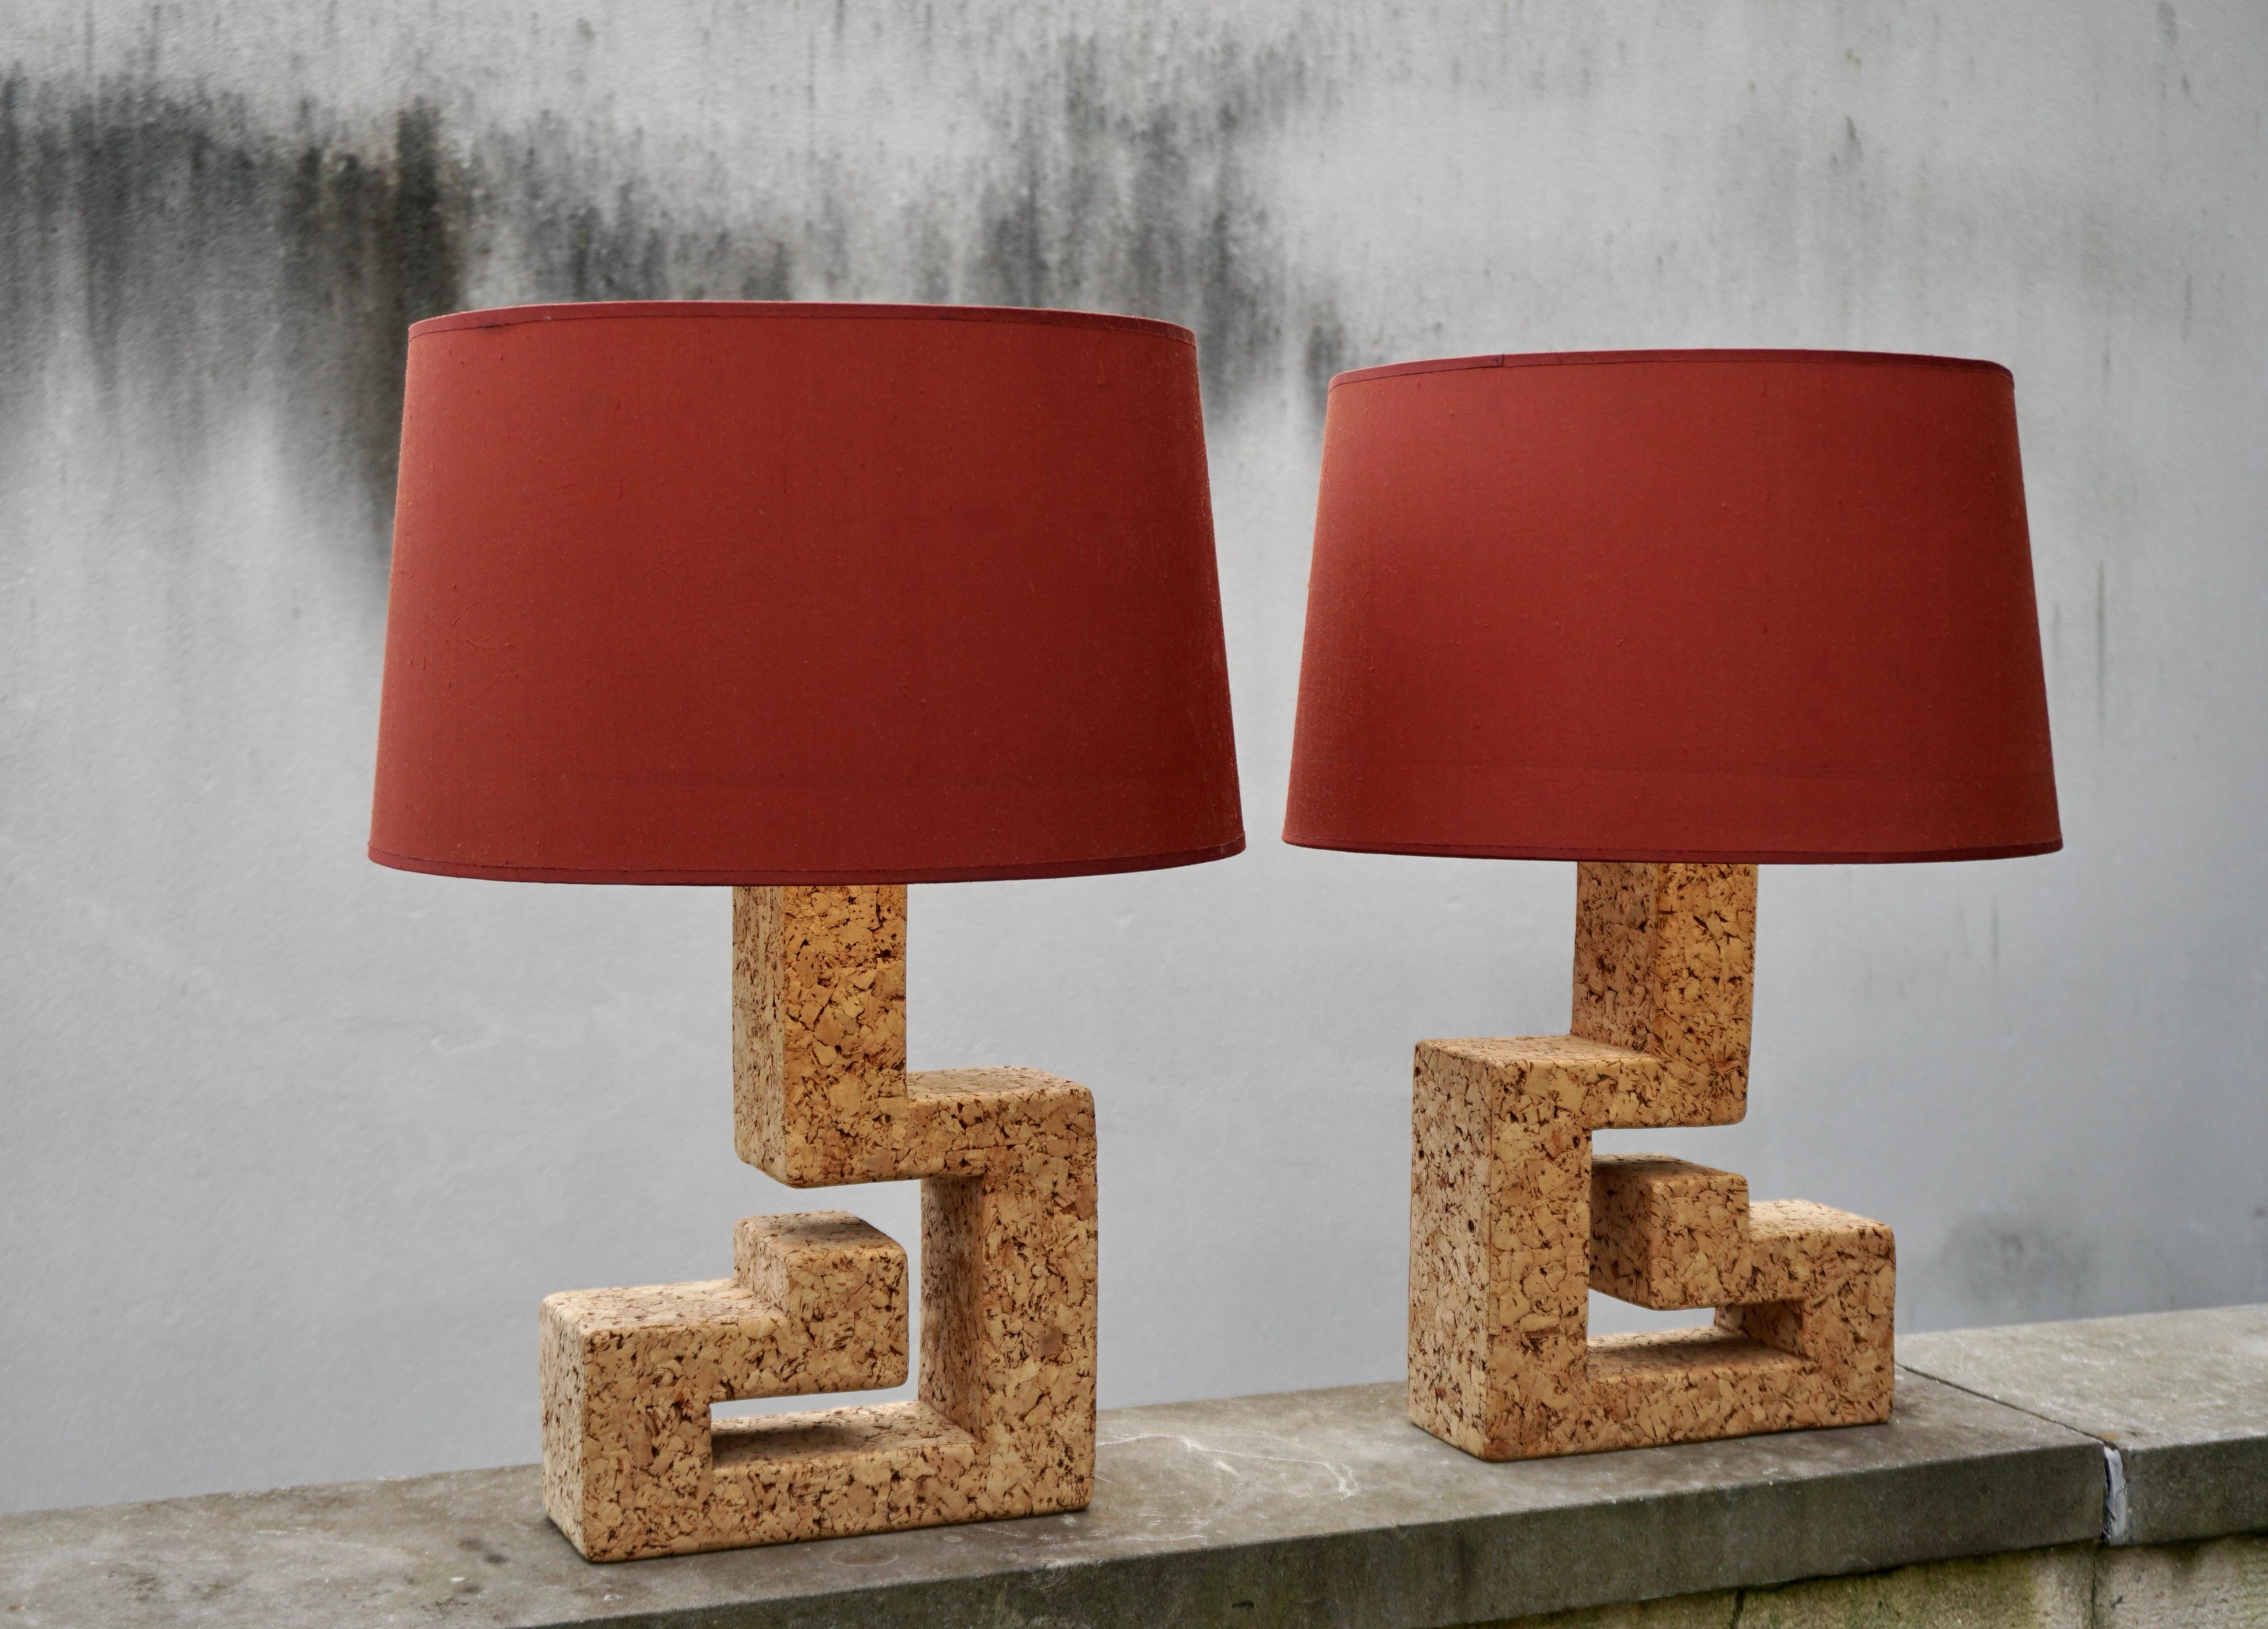 Pair of Mid-Century cubist shaped cork table lamps (Priced as pair).

Total height with the fitting is 16.1